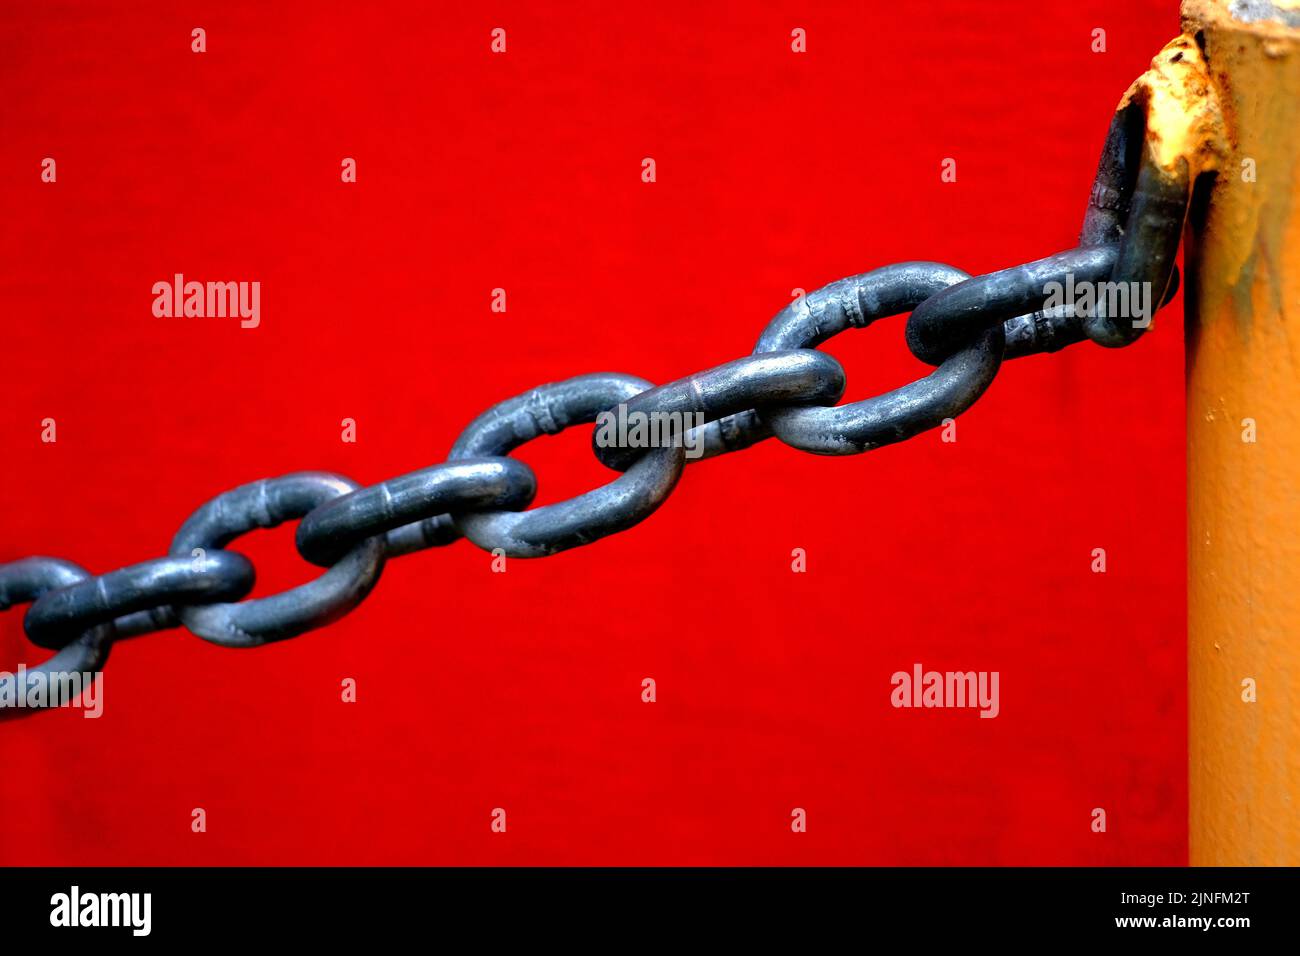 Chain for security hanging from yellow metal pole with red wall in background Stock Photo